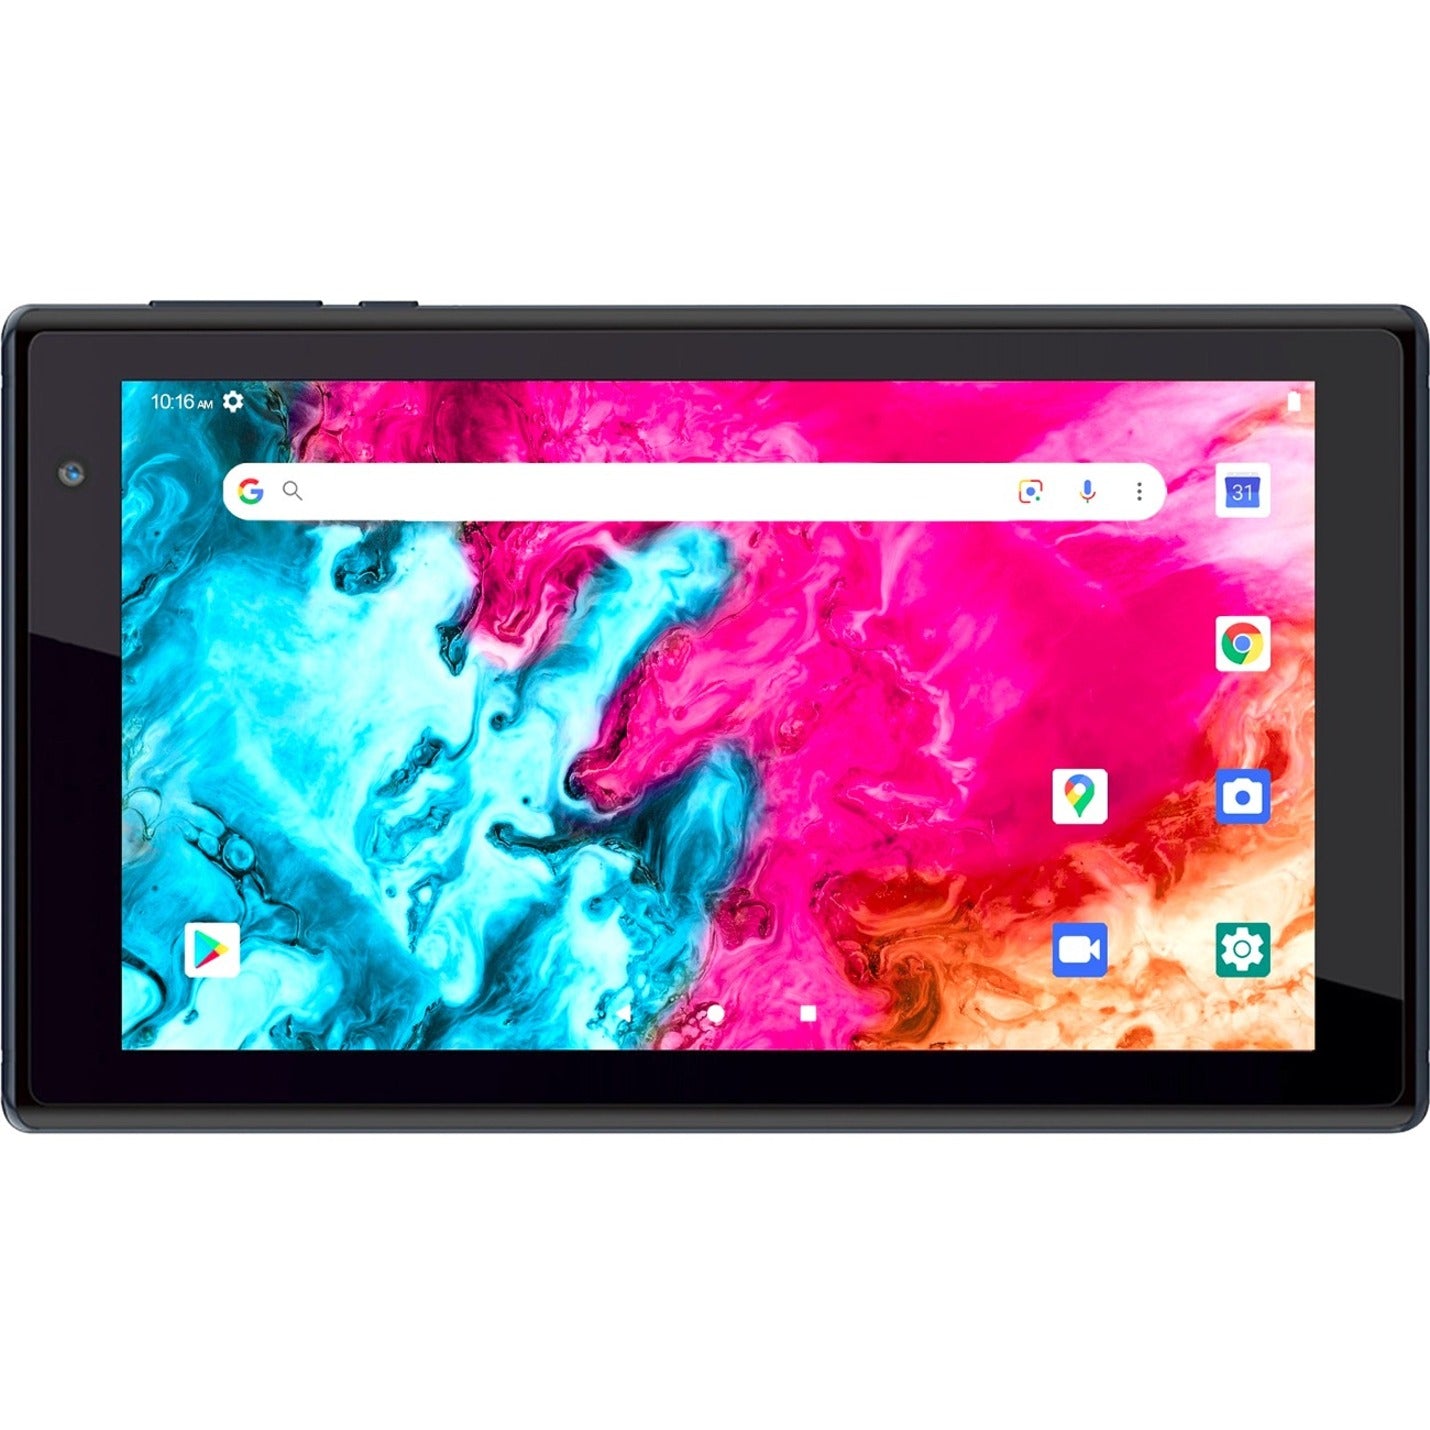 Supersonic SC-2107 7" Quad Core Tablet, Cortex A7, 1GB RAM, 16GB Storage, Android 10